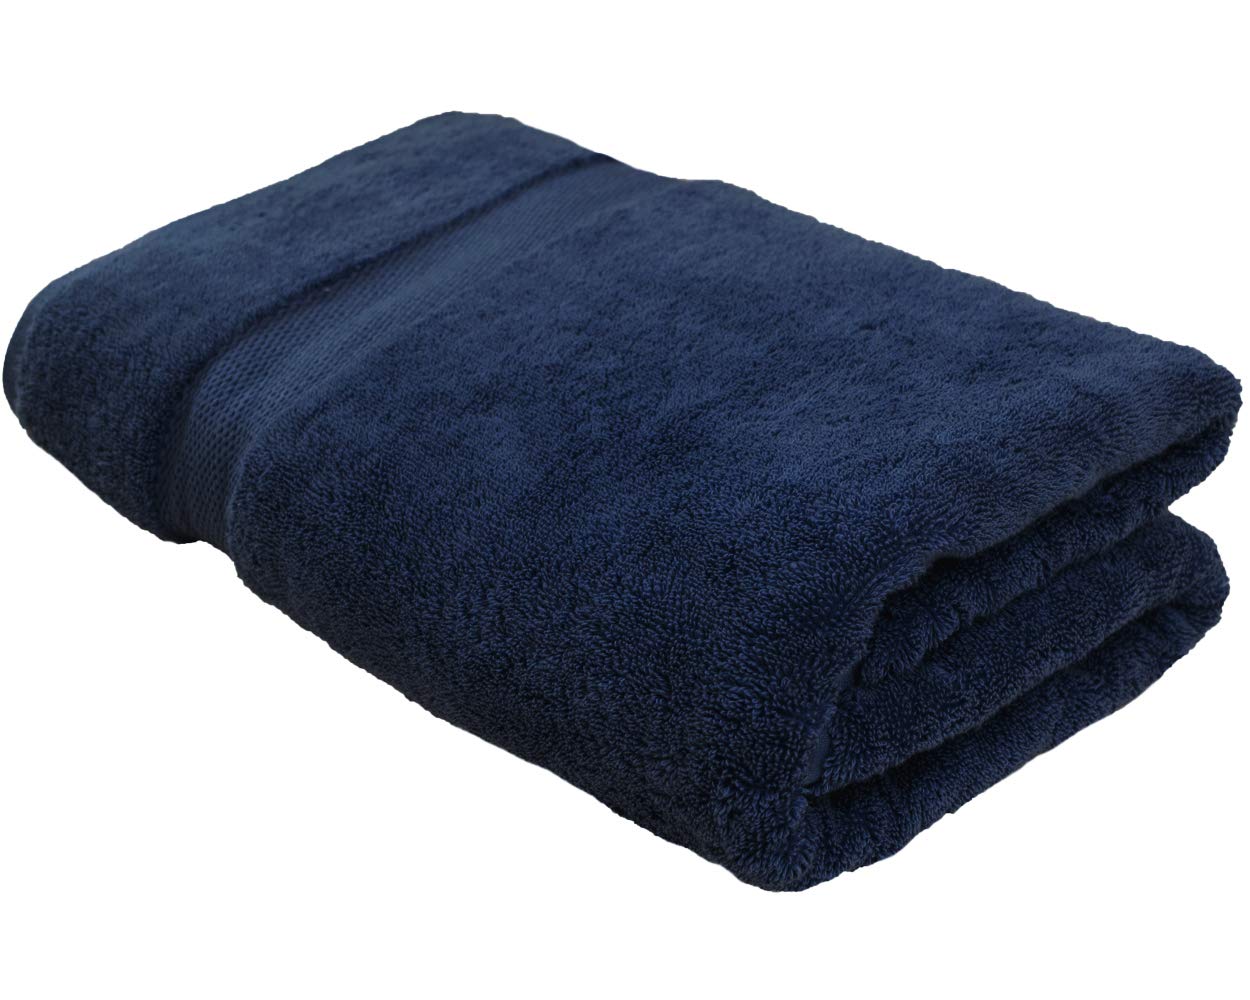 Premium Cotton Bath Sheets (Navy Blue, 30x60 Inch) Luxury Bath Towel  Perfect for Home, Bathrooms, Pool and Gym Ringspun Cotton (4, Navy Blue)